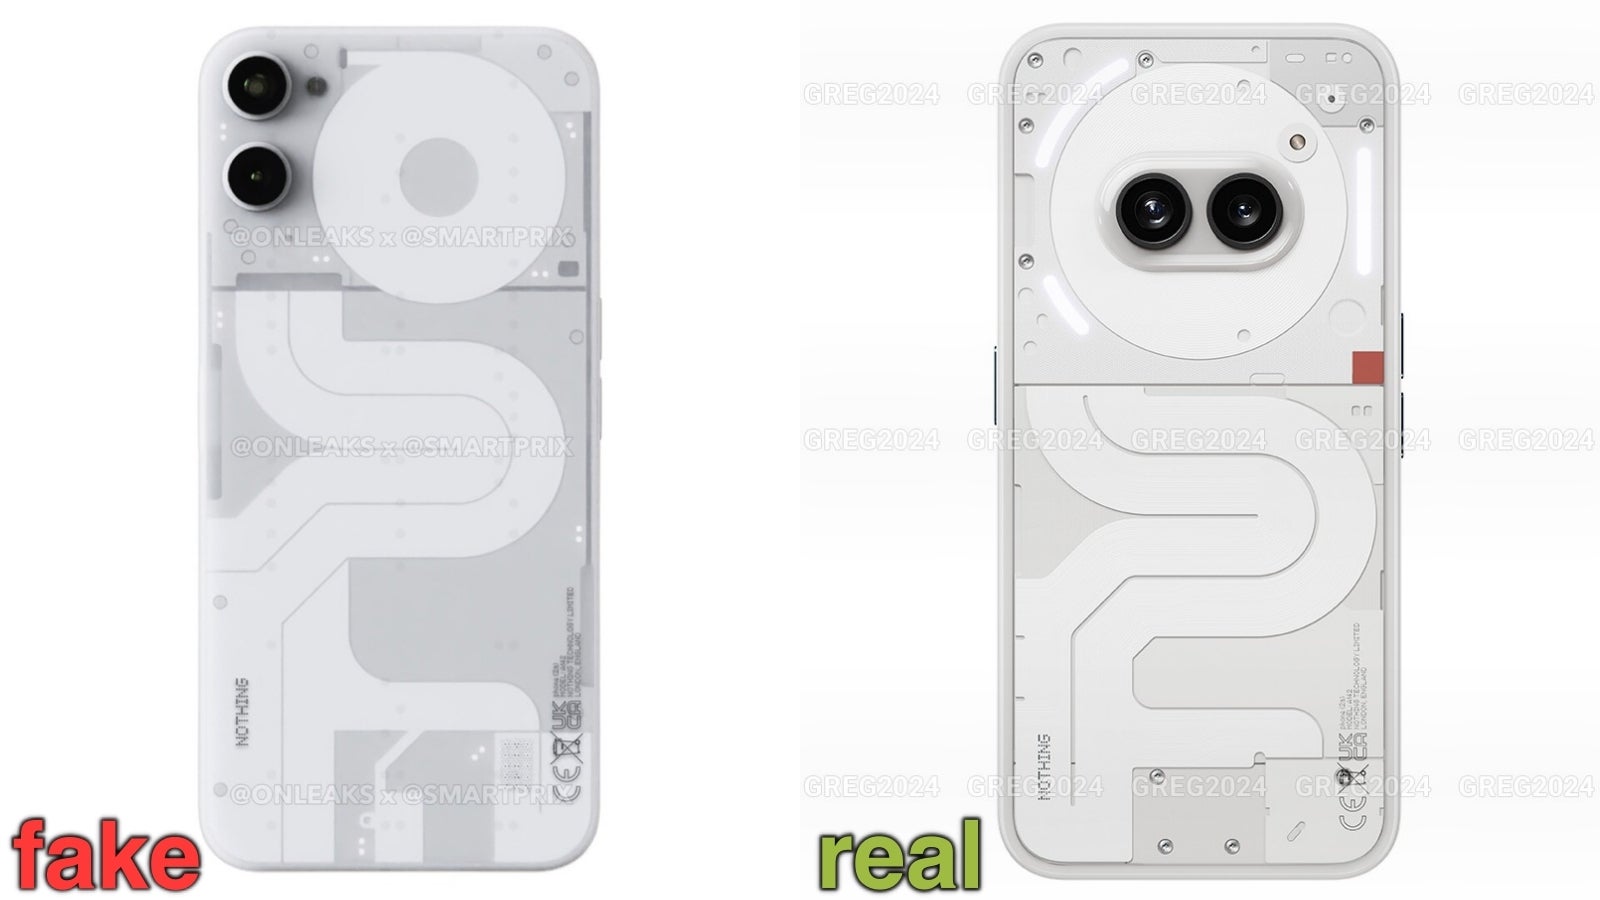 Official Nothing Phone 2a renders (right) were leaked on Nothing’s forum, confirming the design leak we got earlier (left) was fake. - Nothing Phone 2a: Carl Pei’s masterclass in “distractingly stunning design” - enough to beat Pixel?